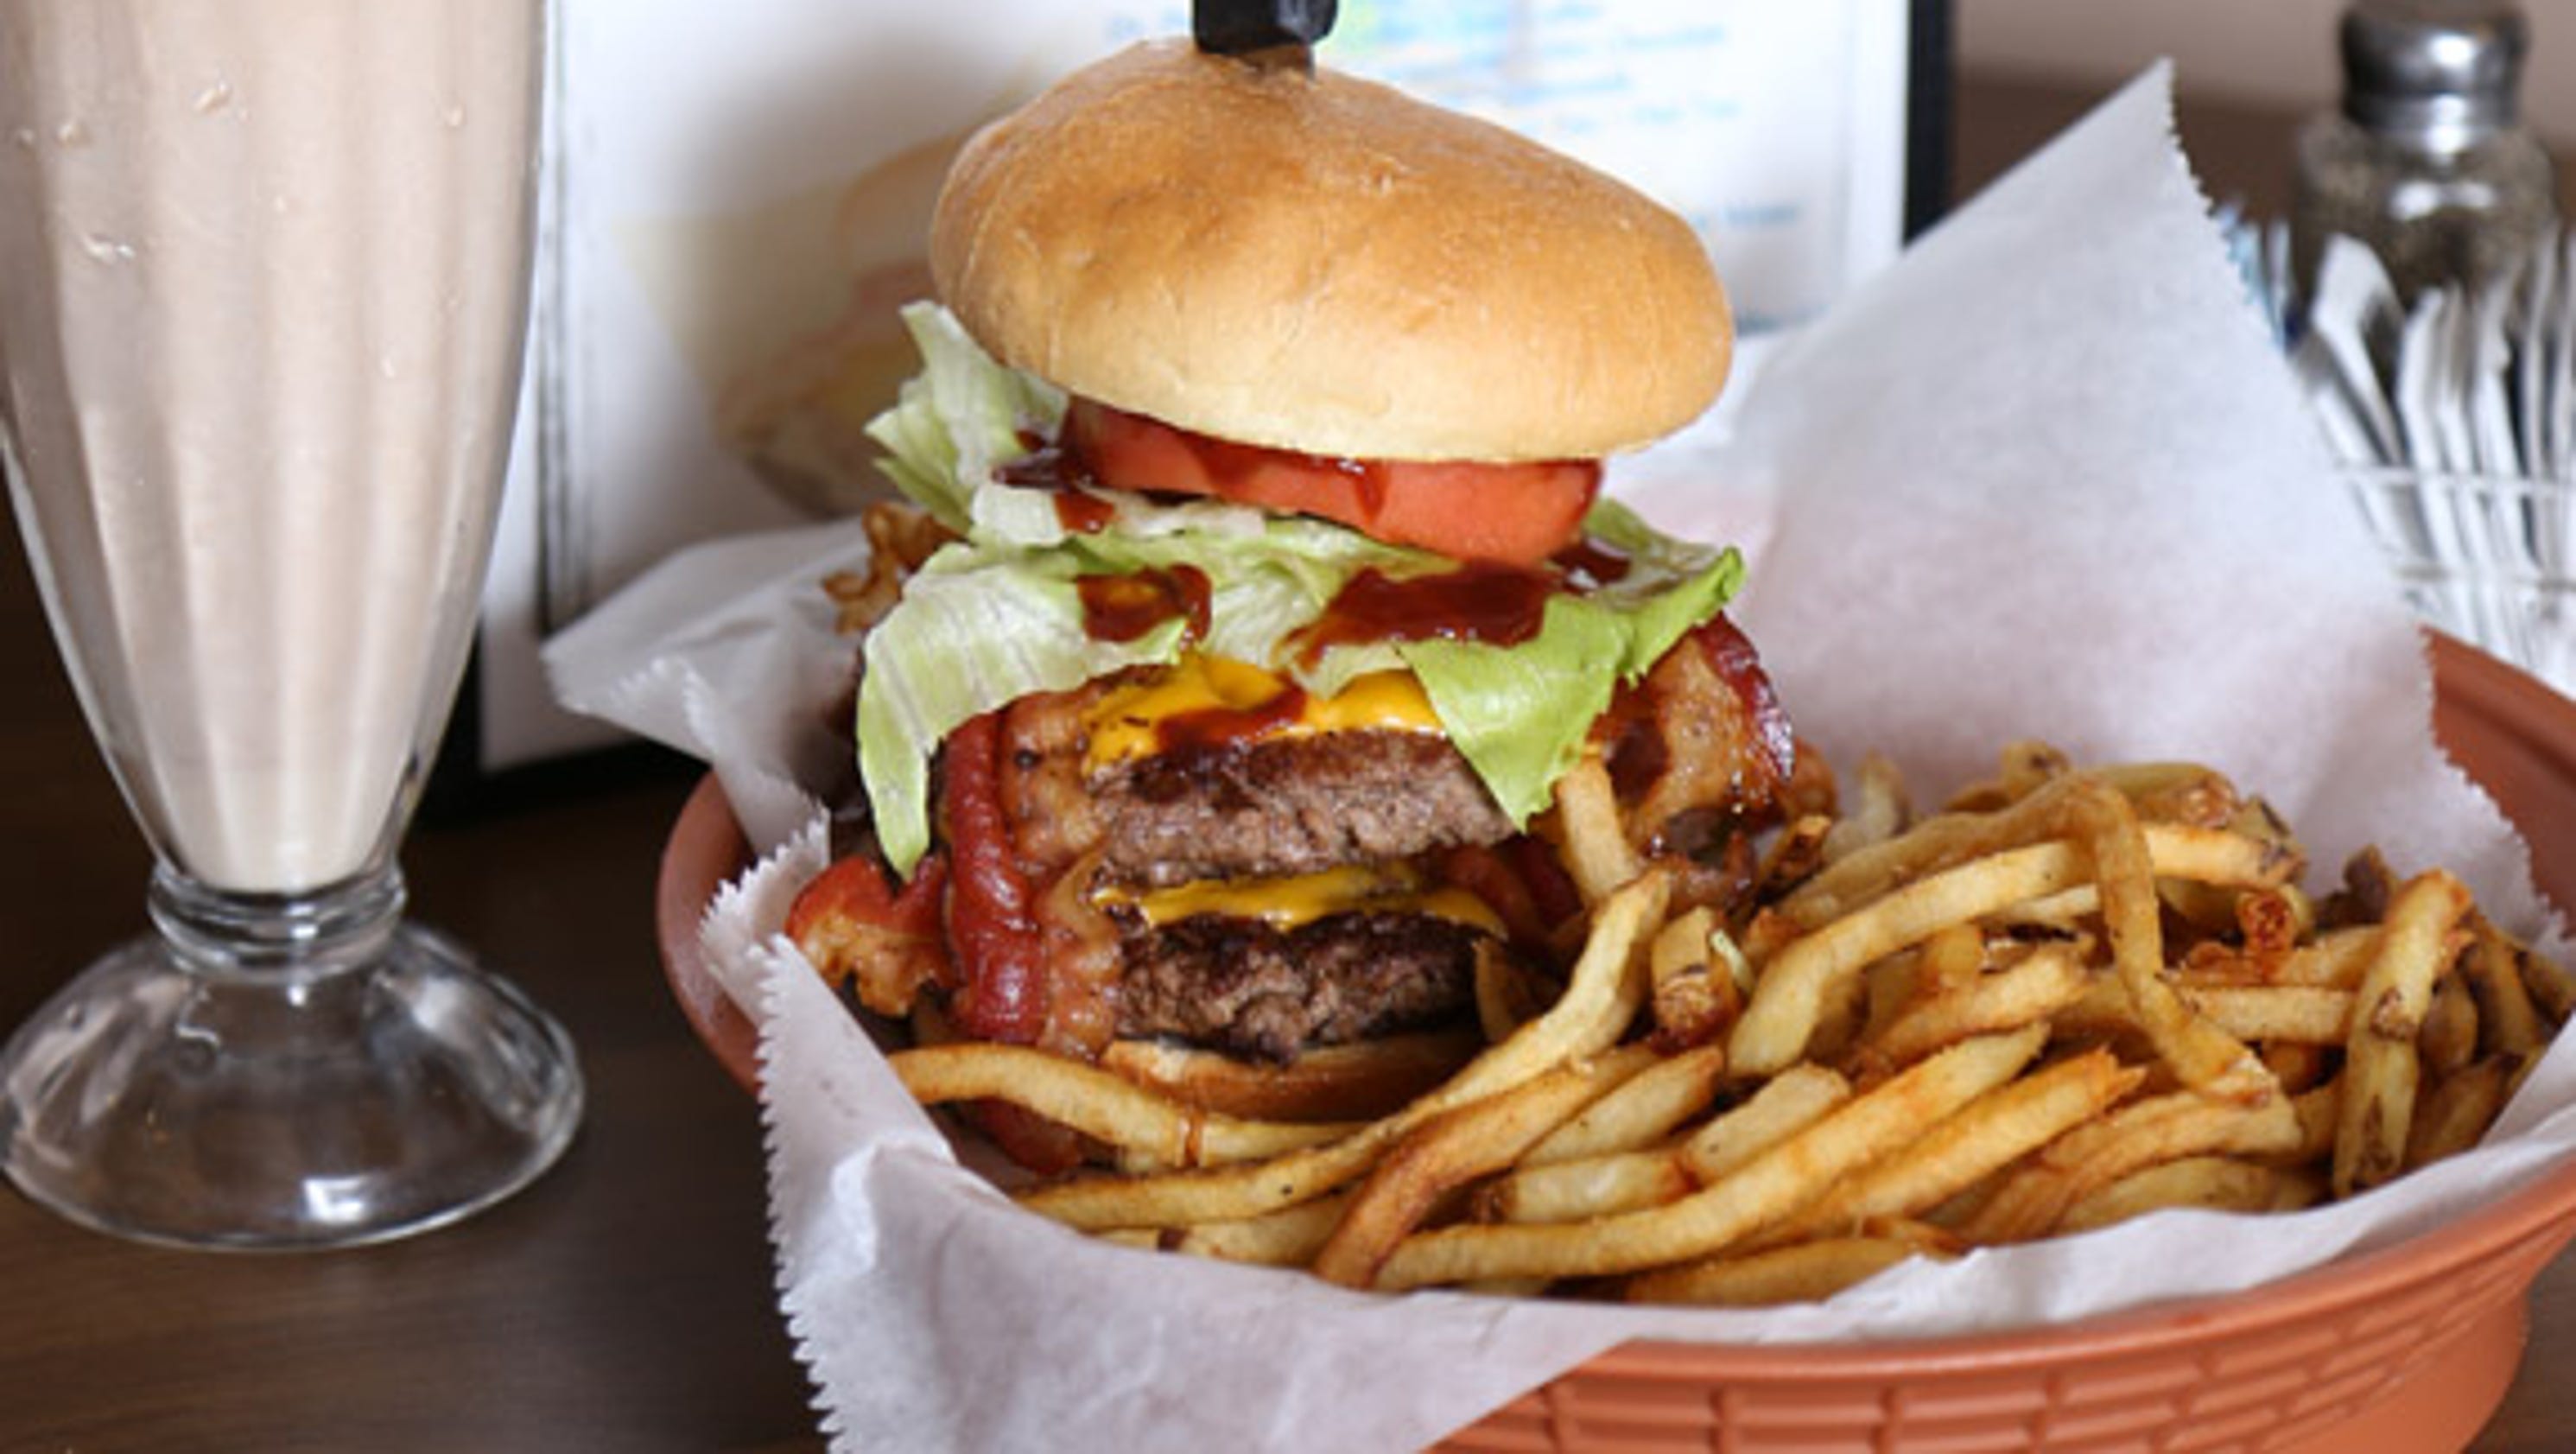 Who has the best burger in Iowa?